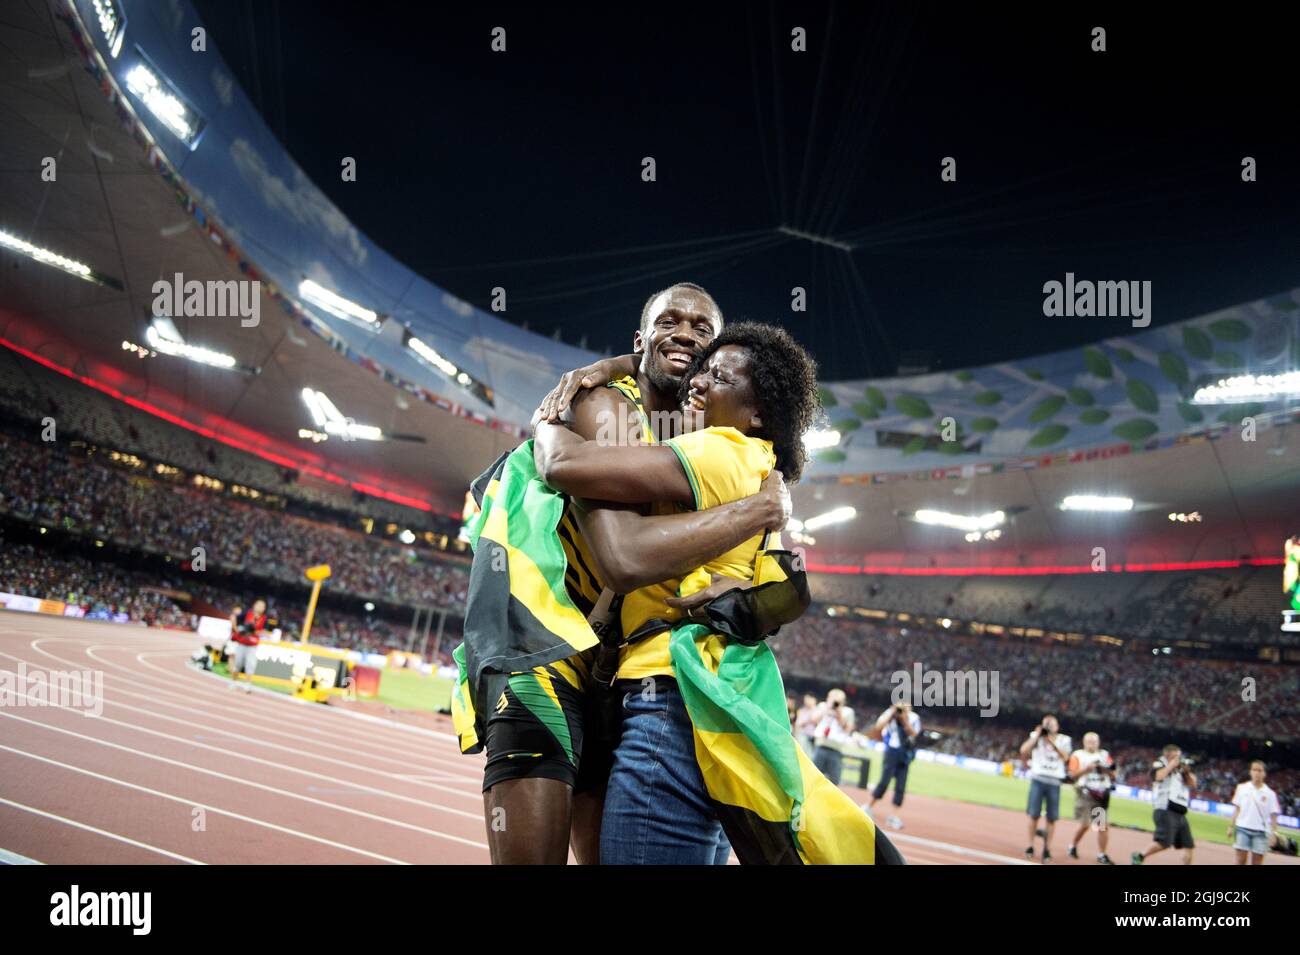 BEIJING 20150823 Usain Bolt of Jamaica gets a hug from his mother Jennifer Bolt after winning the men's 100m final during the Beijing 2015 IAAF World Championships at the National Stadium in Beijing, China, August 23, 2015. Photo: Jessica Gow / TT / Kod 10070  Stock Photo